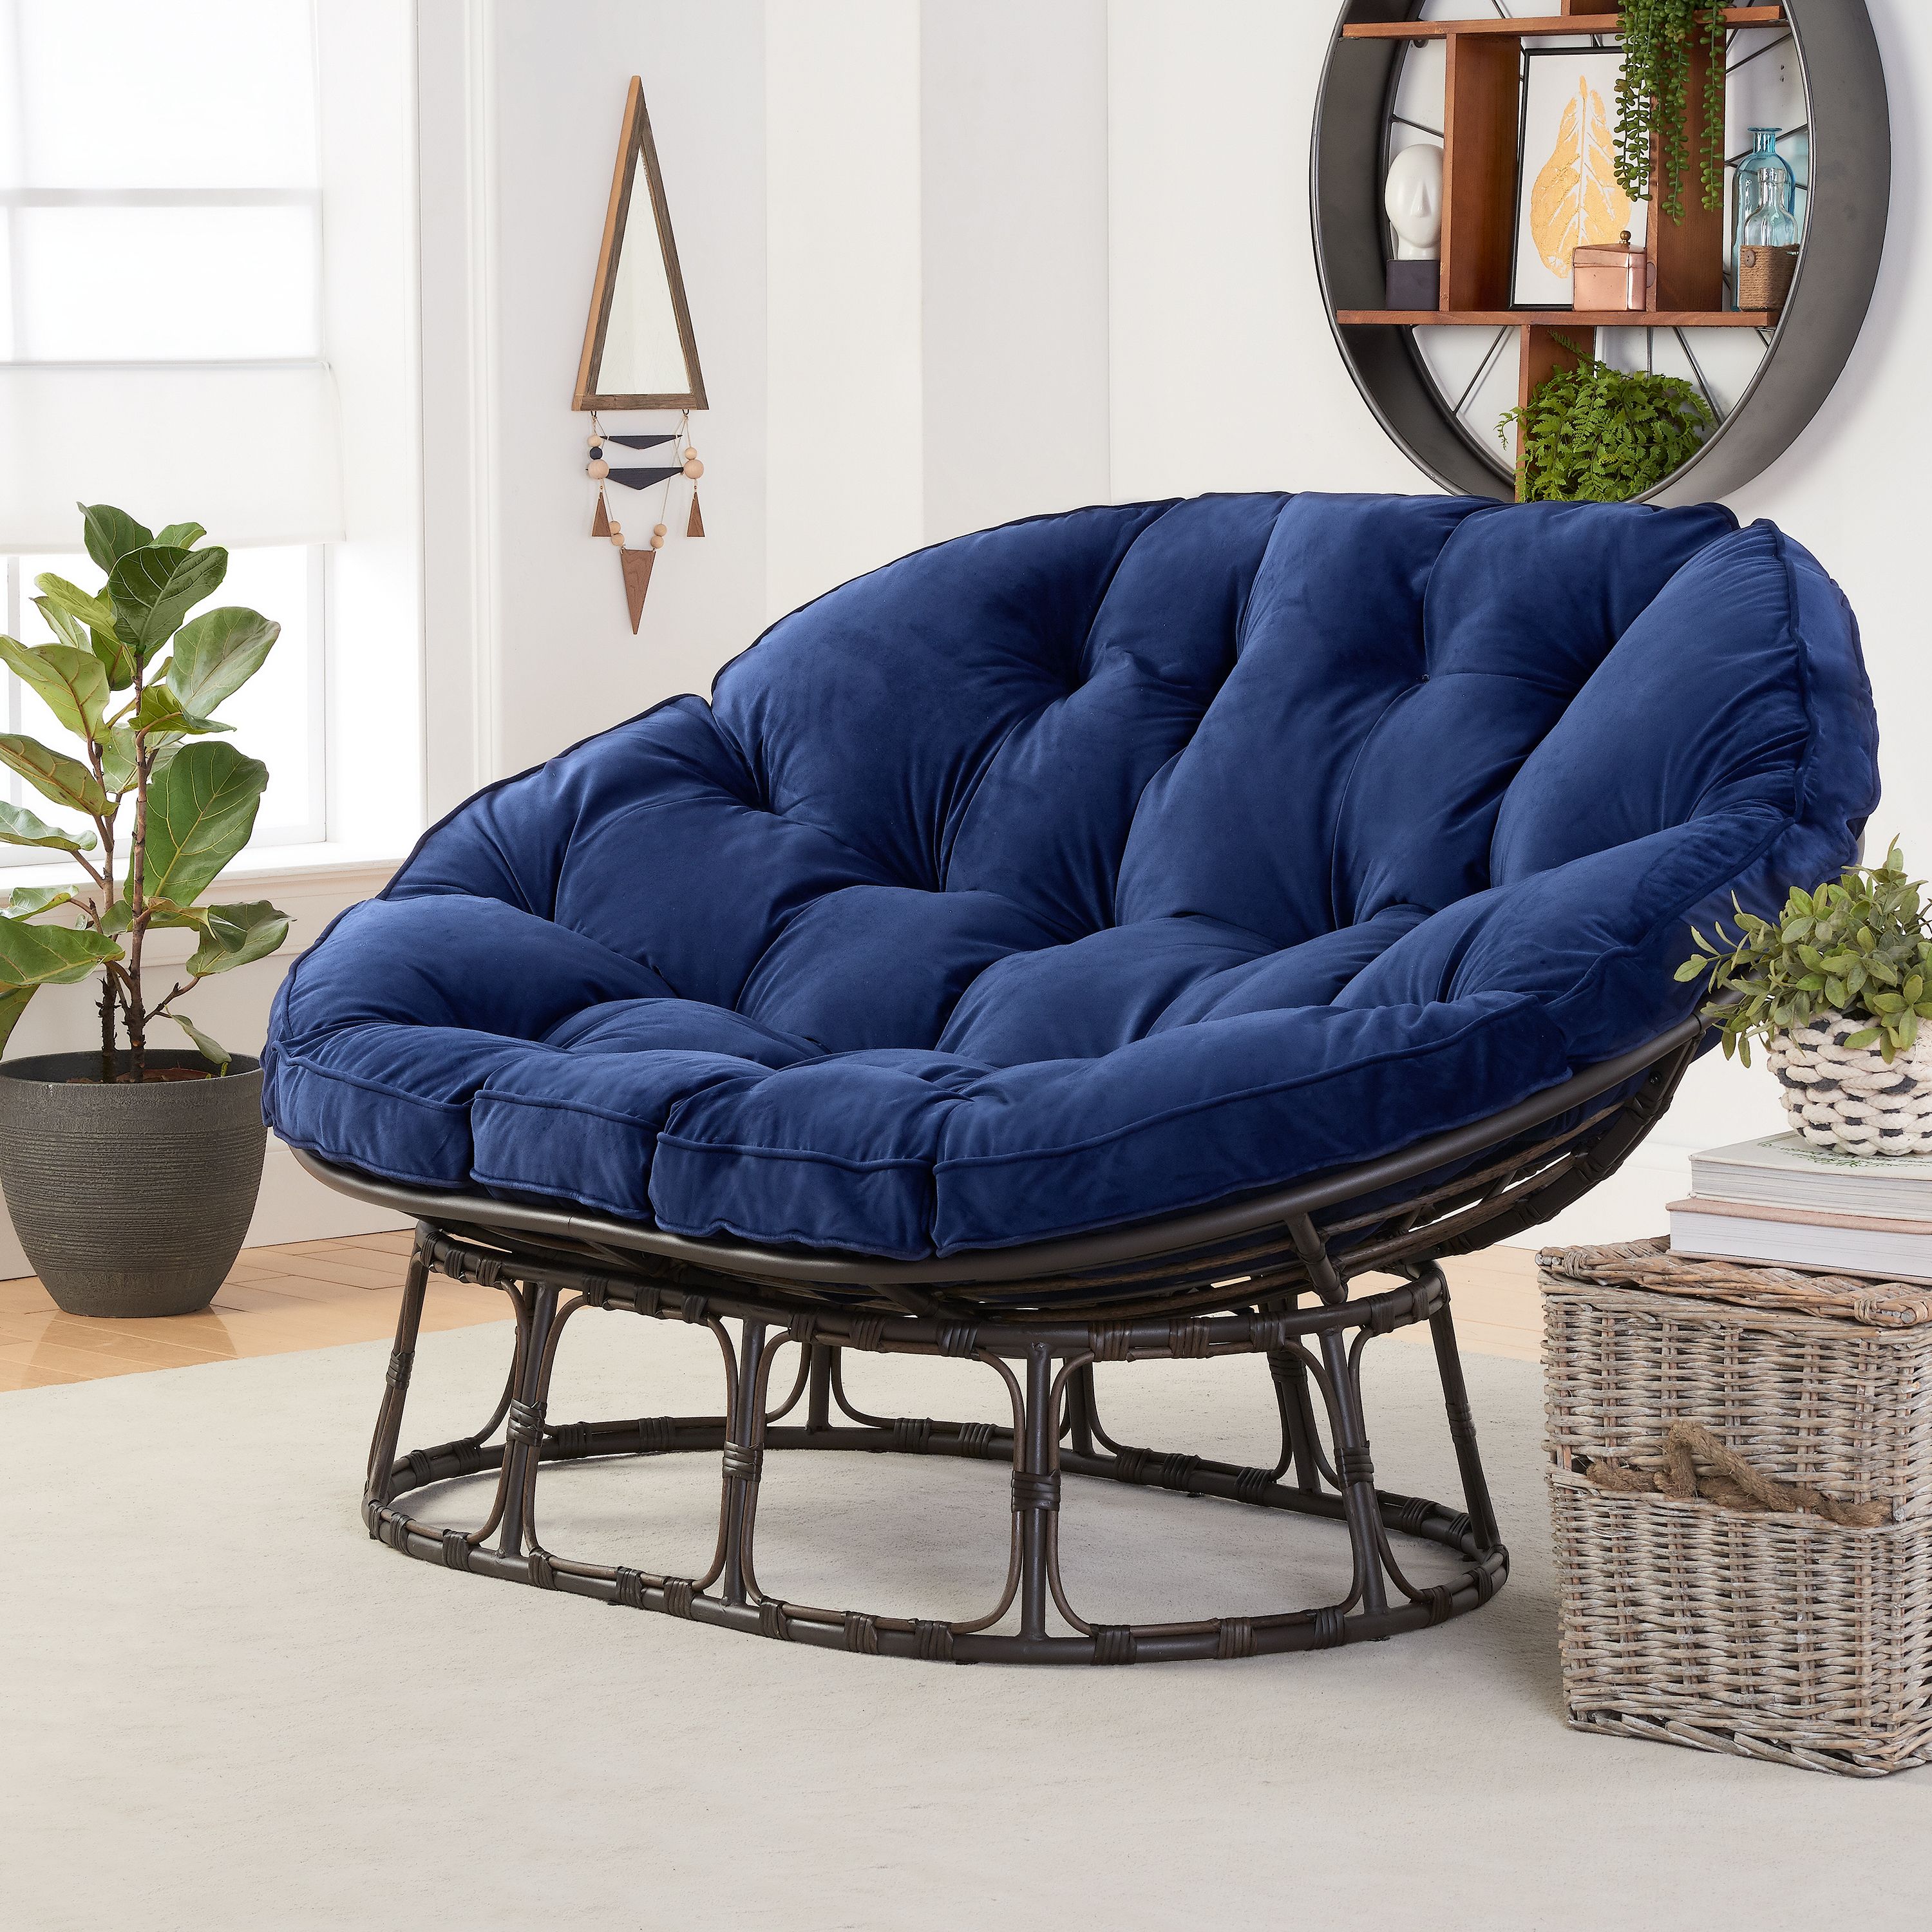 Better Homes & Gardens Double Papasan Chair, Navy Blue - image 1 of 5